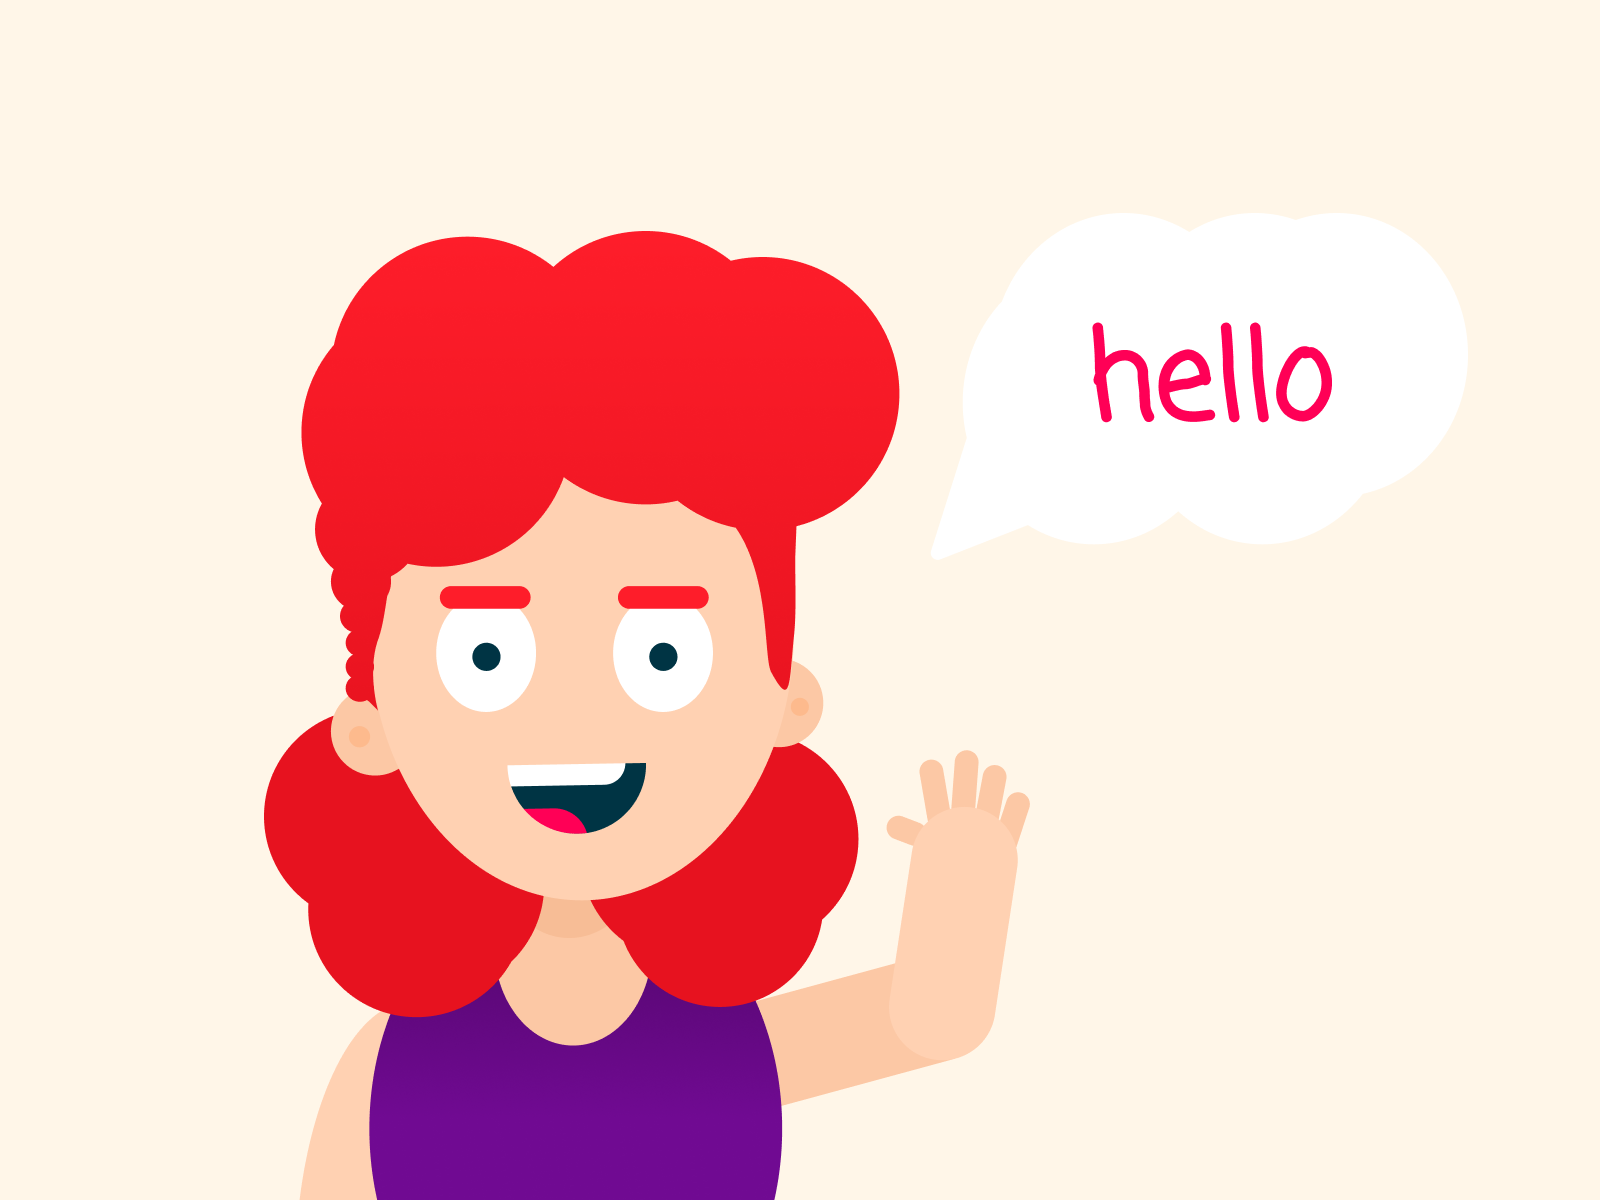 Trying out character design by Praveen Juge on Dribbble